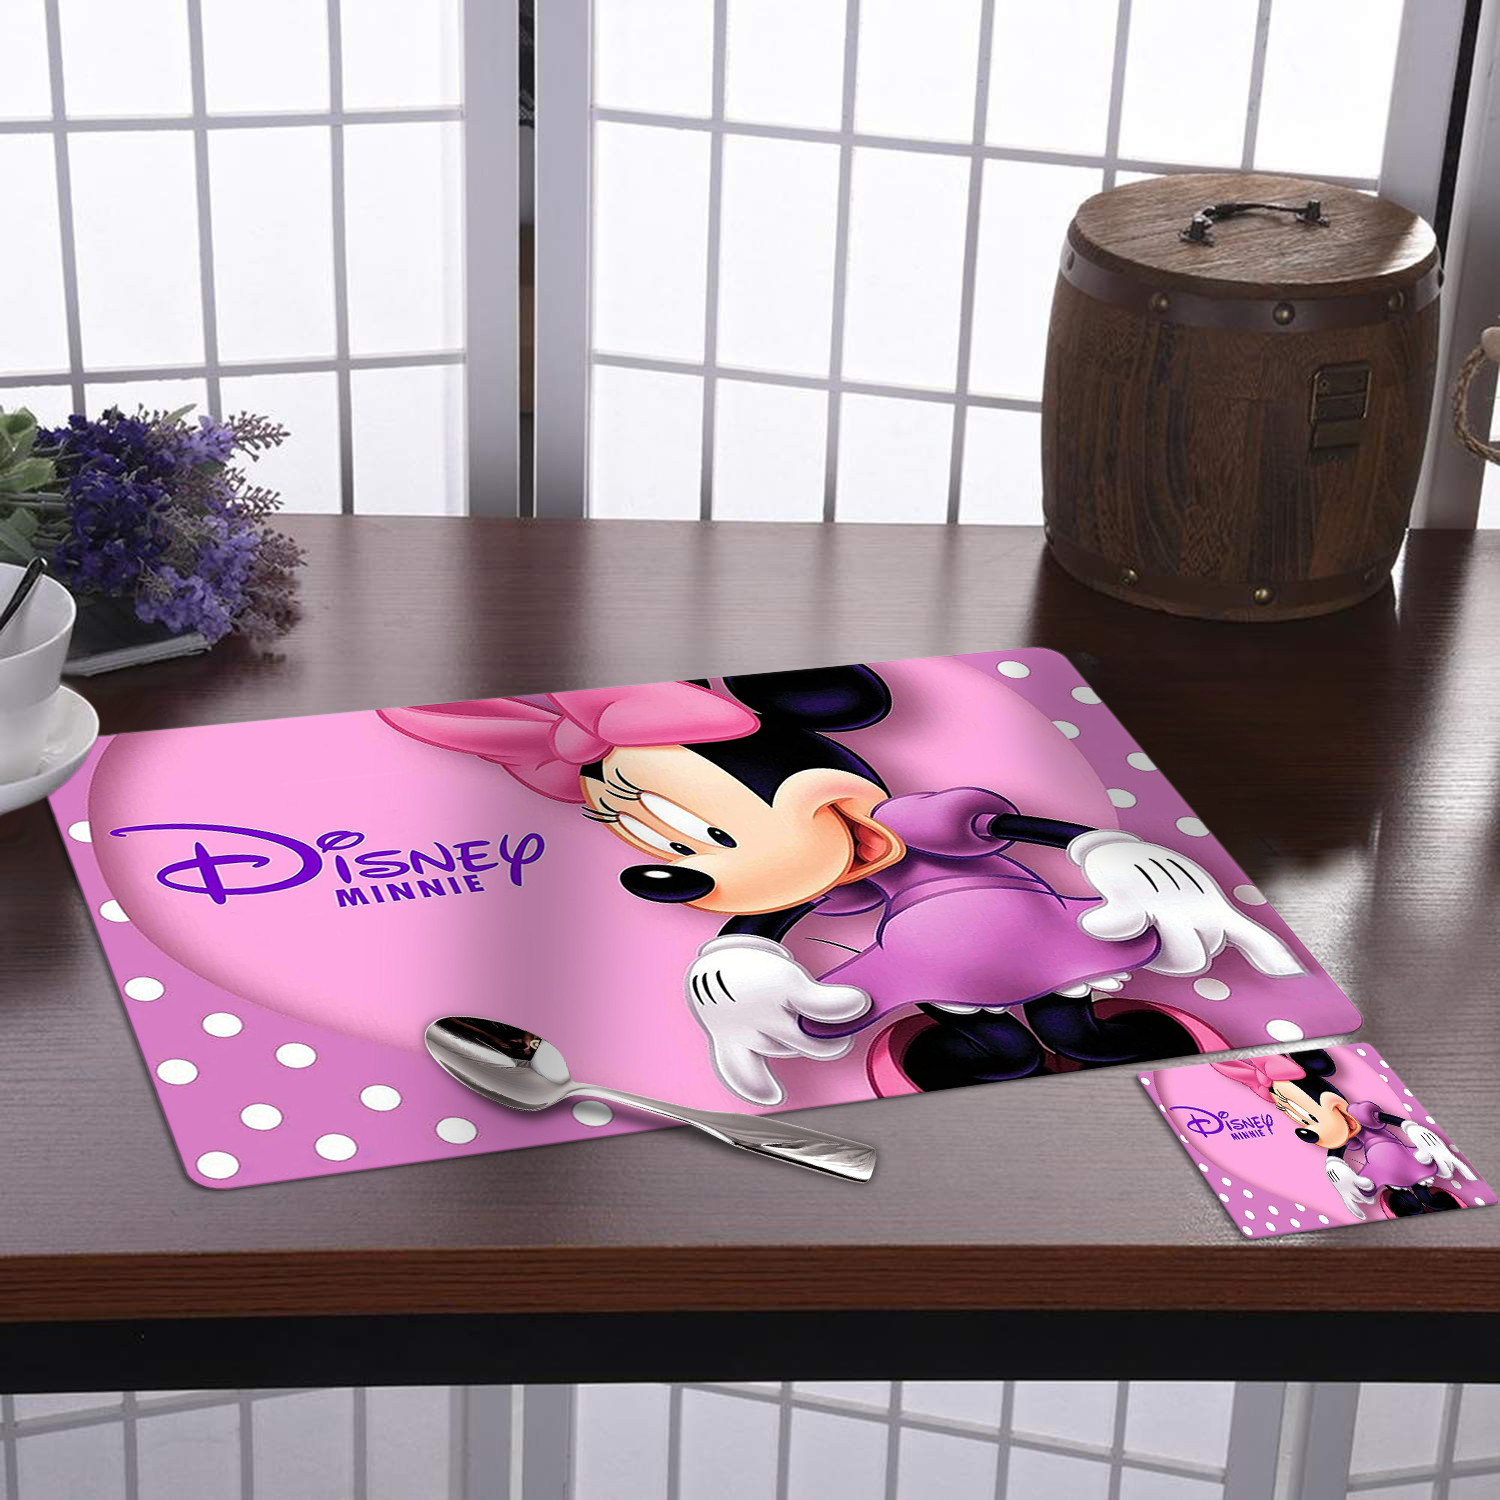 Kuber Industries Multiuses Minnie Print PVC Table Placemat With 6 Coasters for kitchen, Dining Table Set of 6 (Pink)